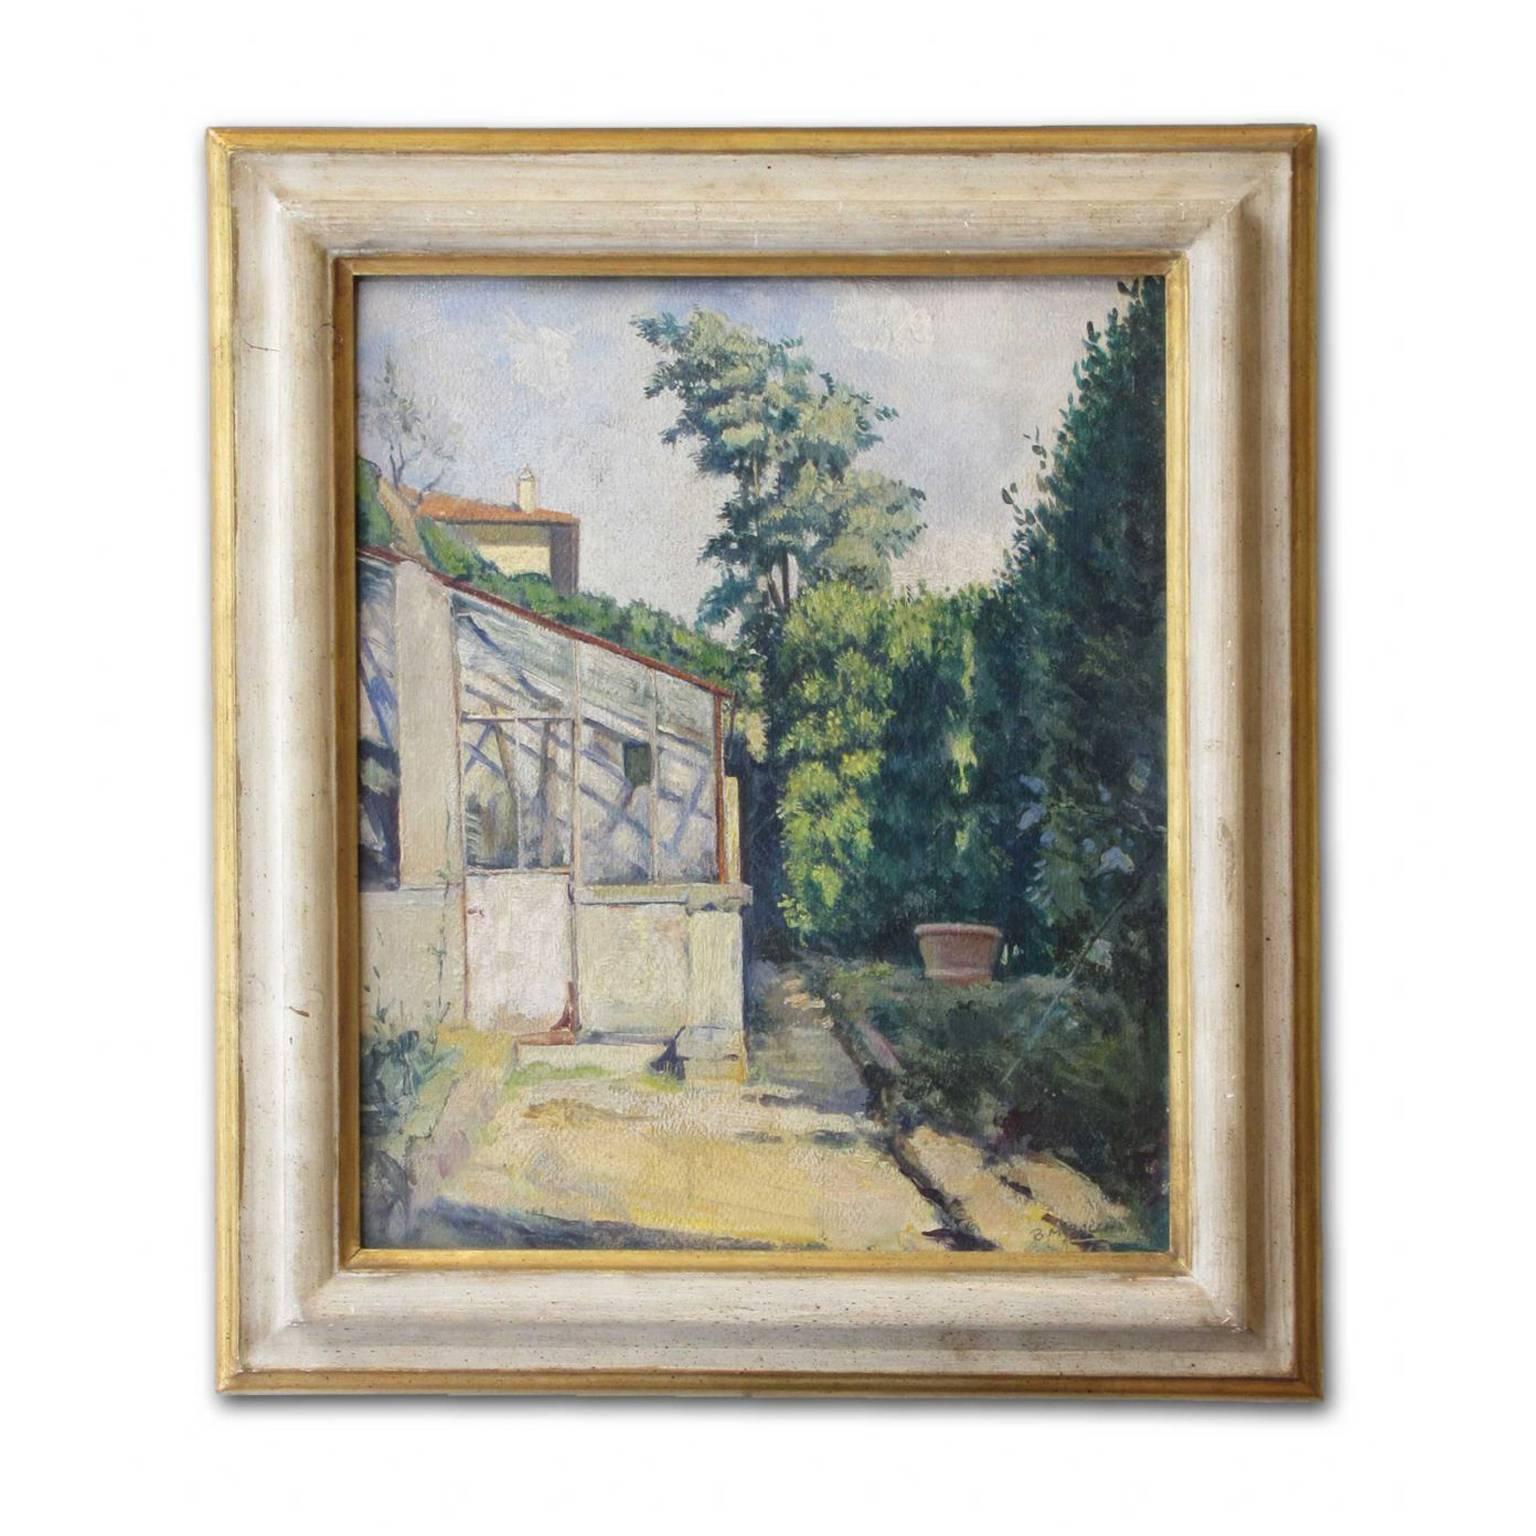 Baccio Maria Bacci (Florence, 1888 - Fiesole, 1974)
'Garden view in Fiesole'
Oil on cardboard
Signed bottom right: B. M. Bacci
On the verso, with pencil: 